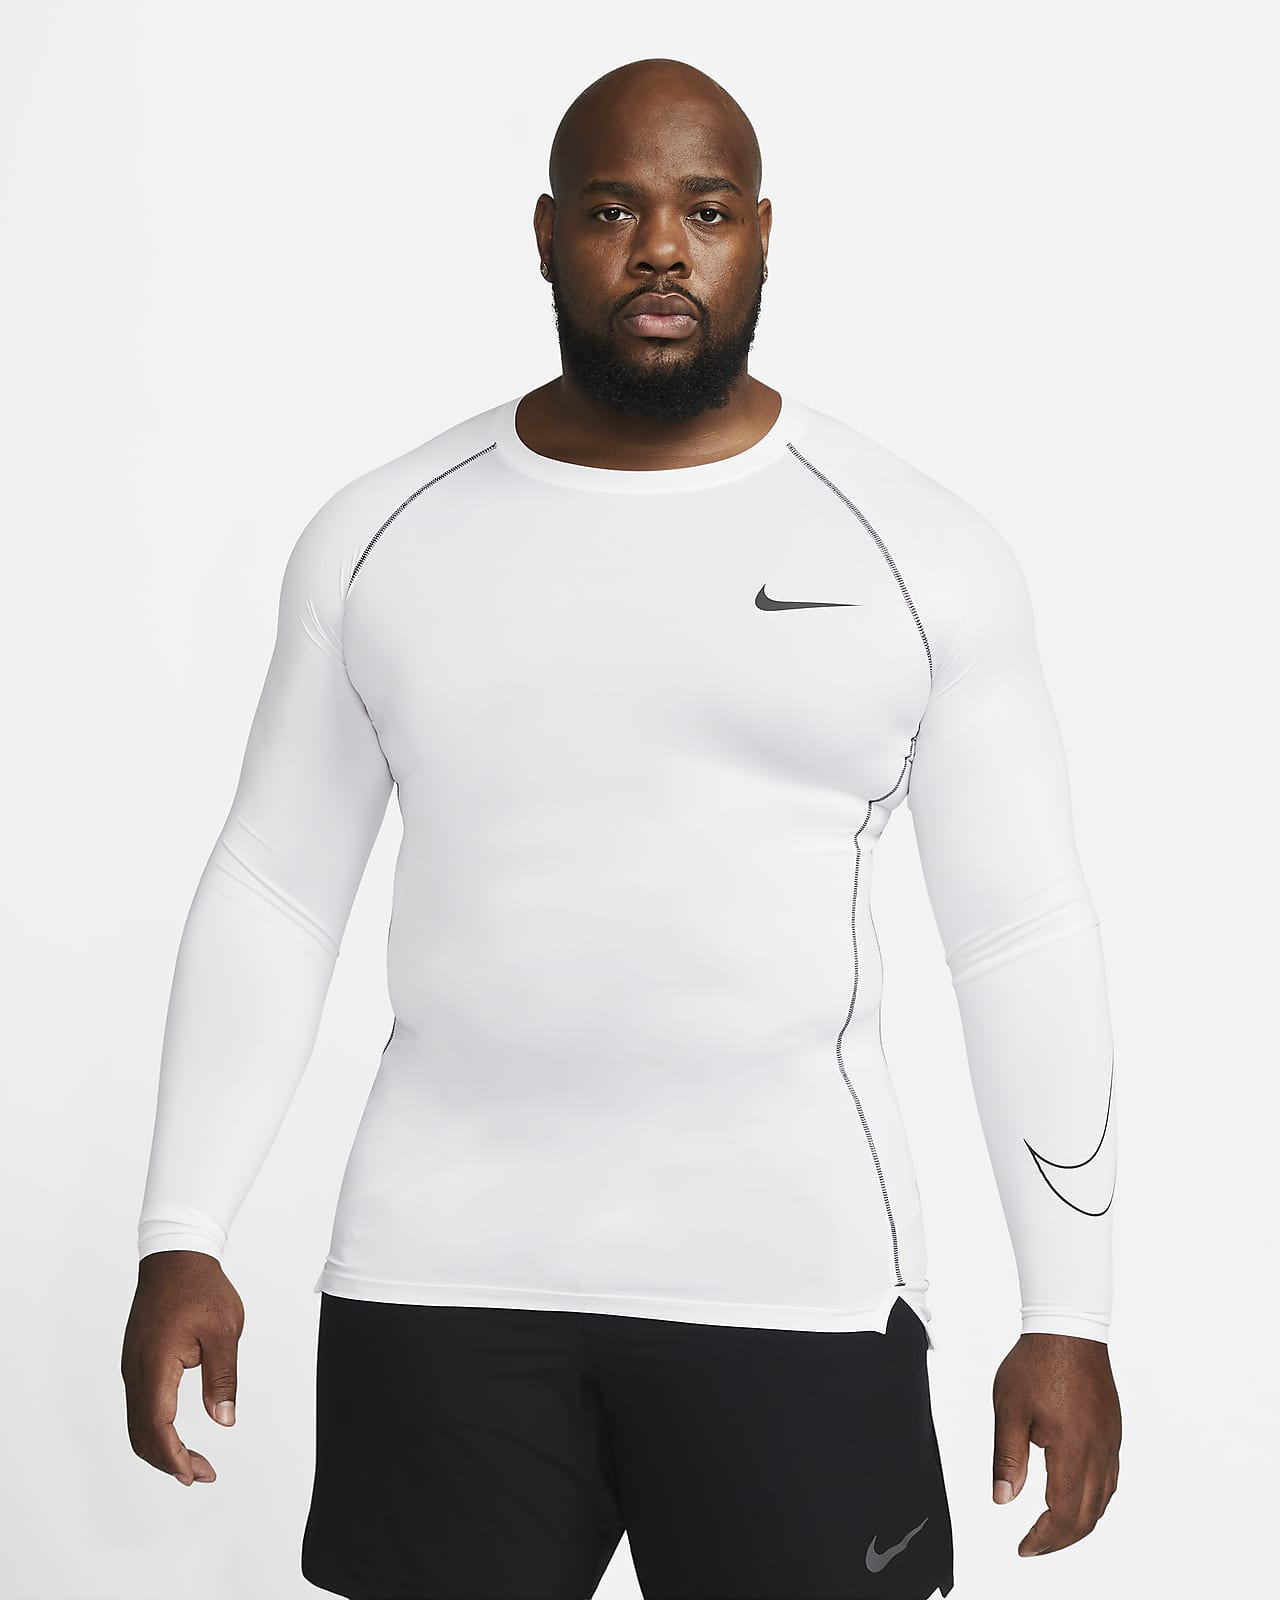 Manches longues Maillots Compression Nike Pro. Nike FR